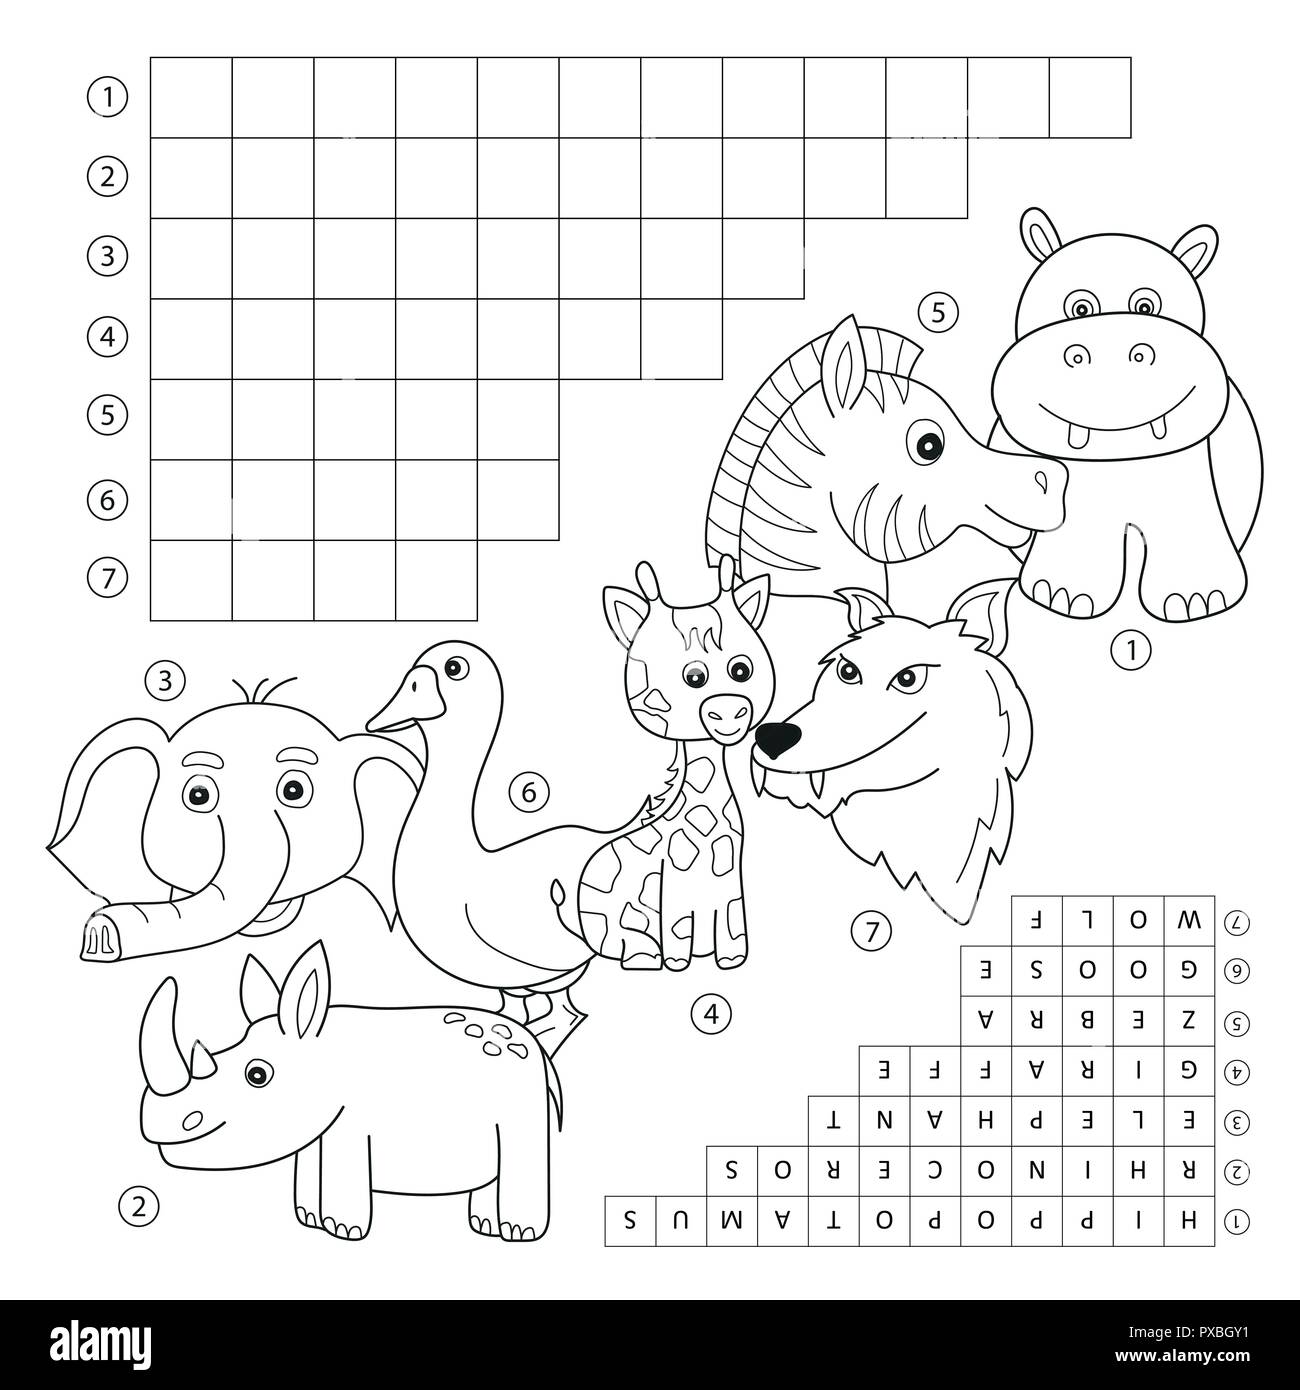 Crossword coloring book page education game for children about animals stock vector image art